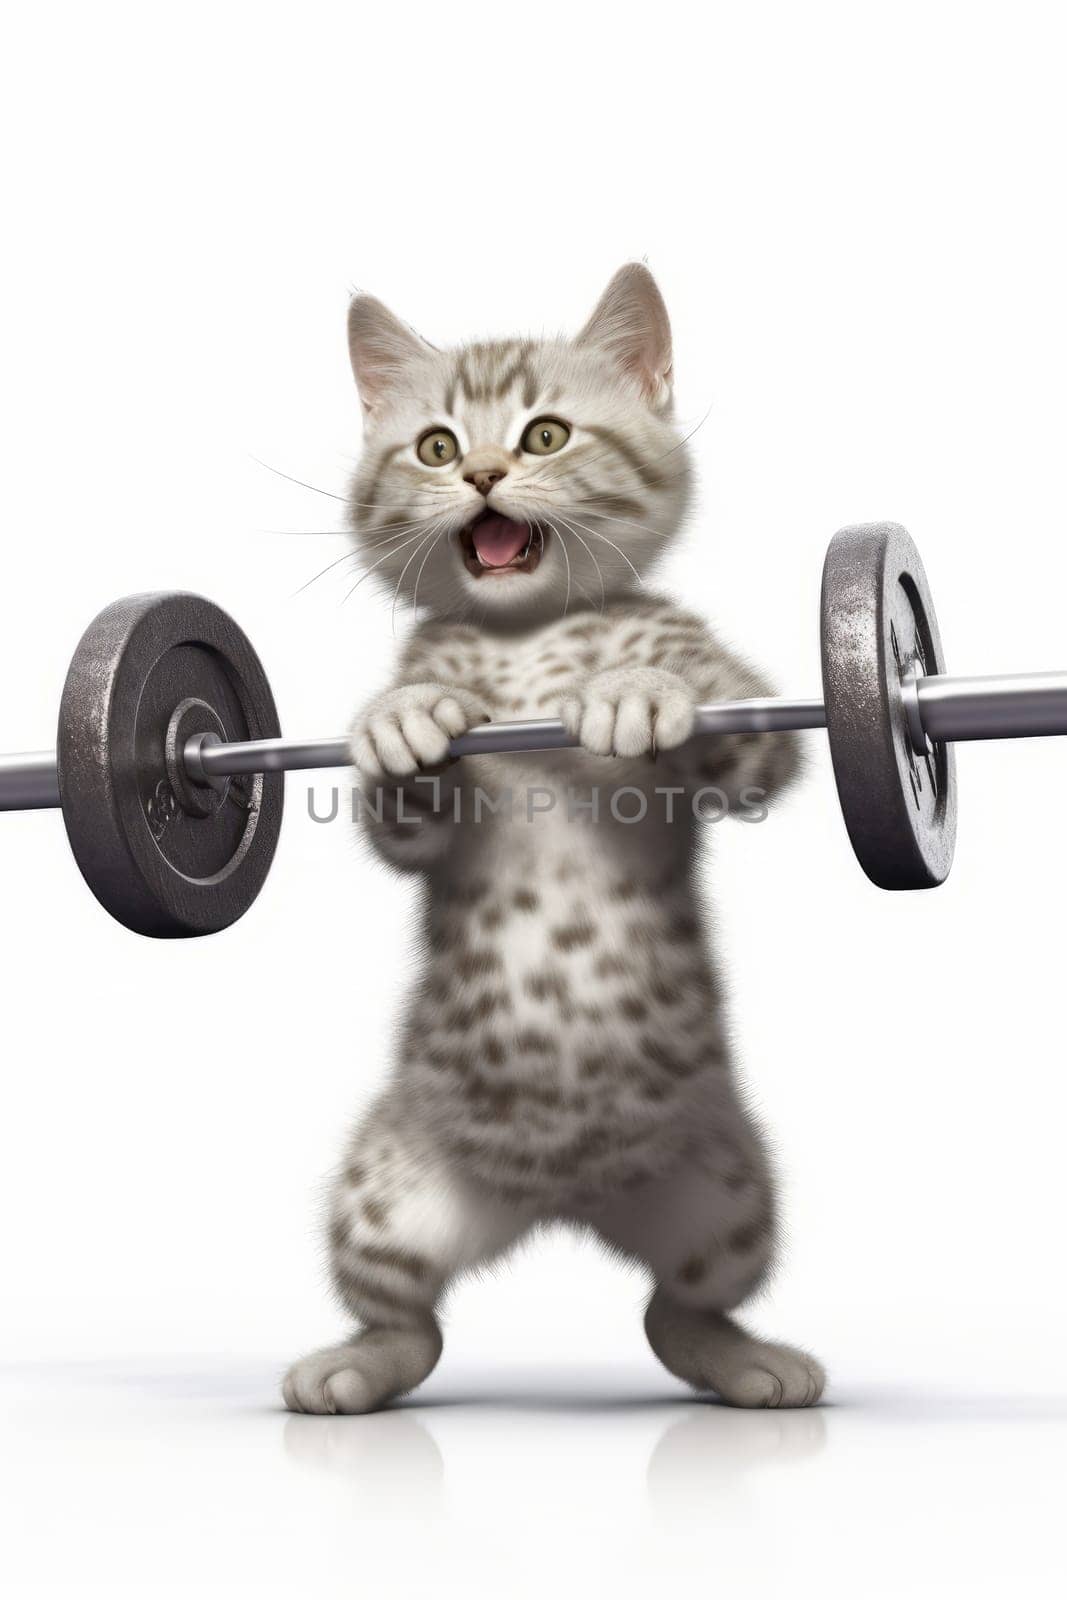 Funny gray kitten lifts a barbell standing on a white background.